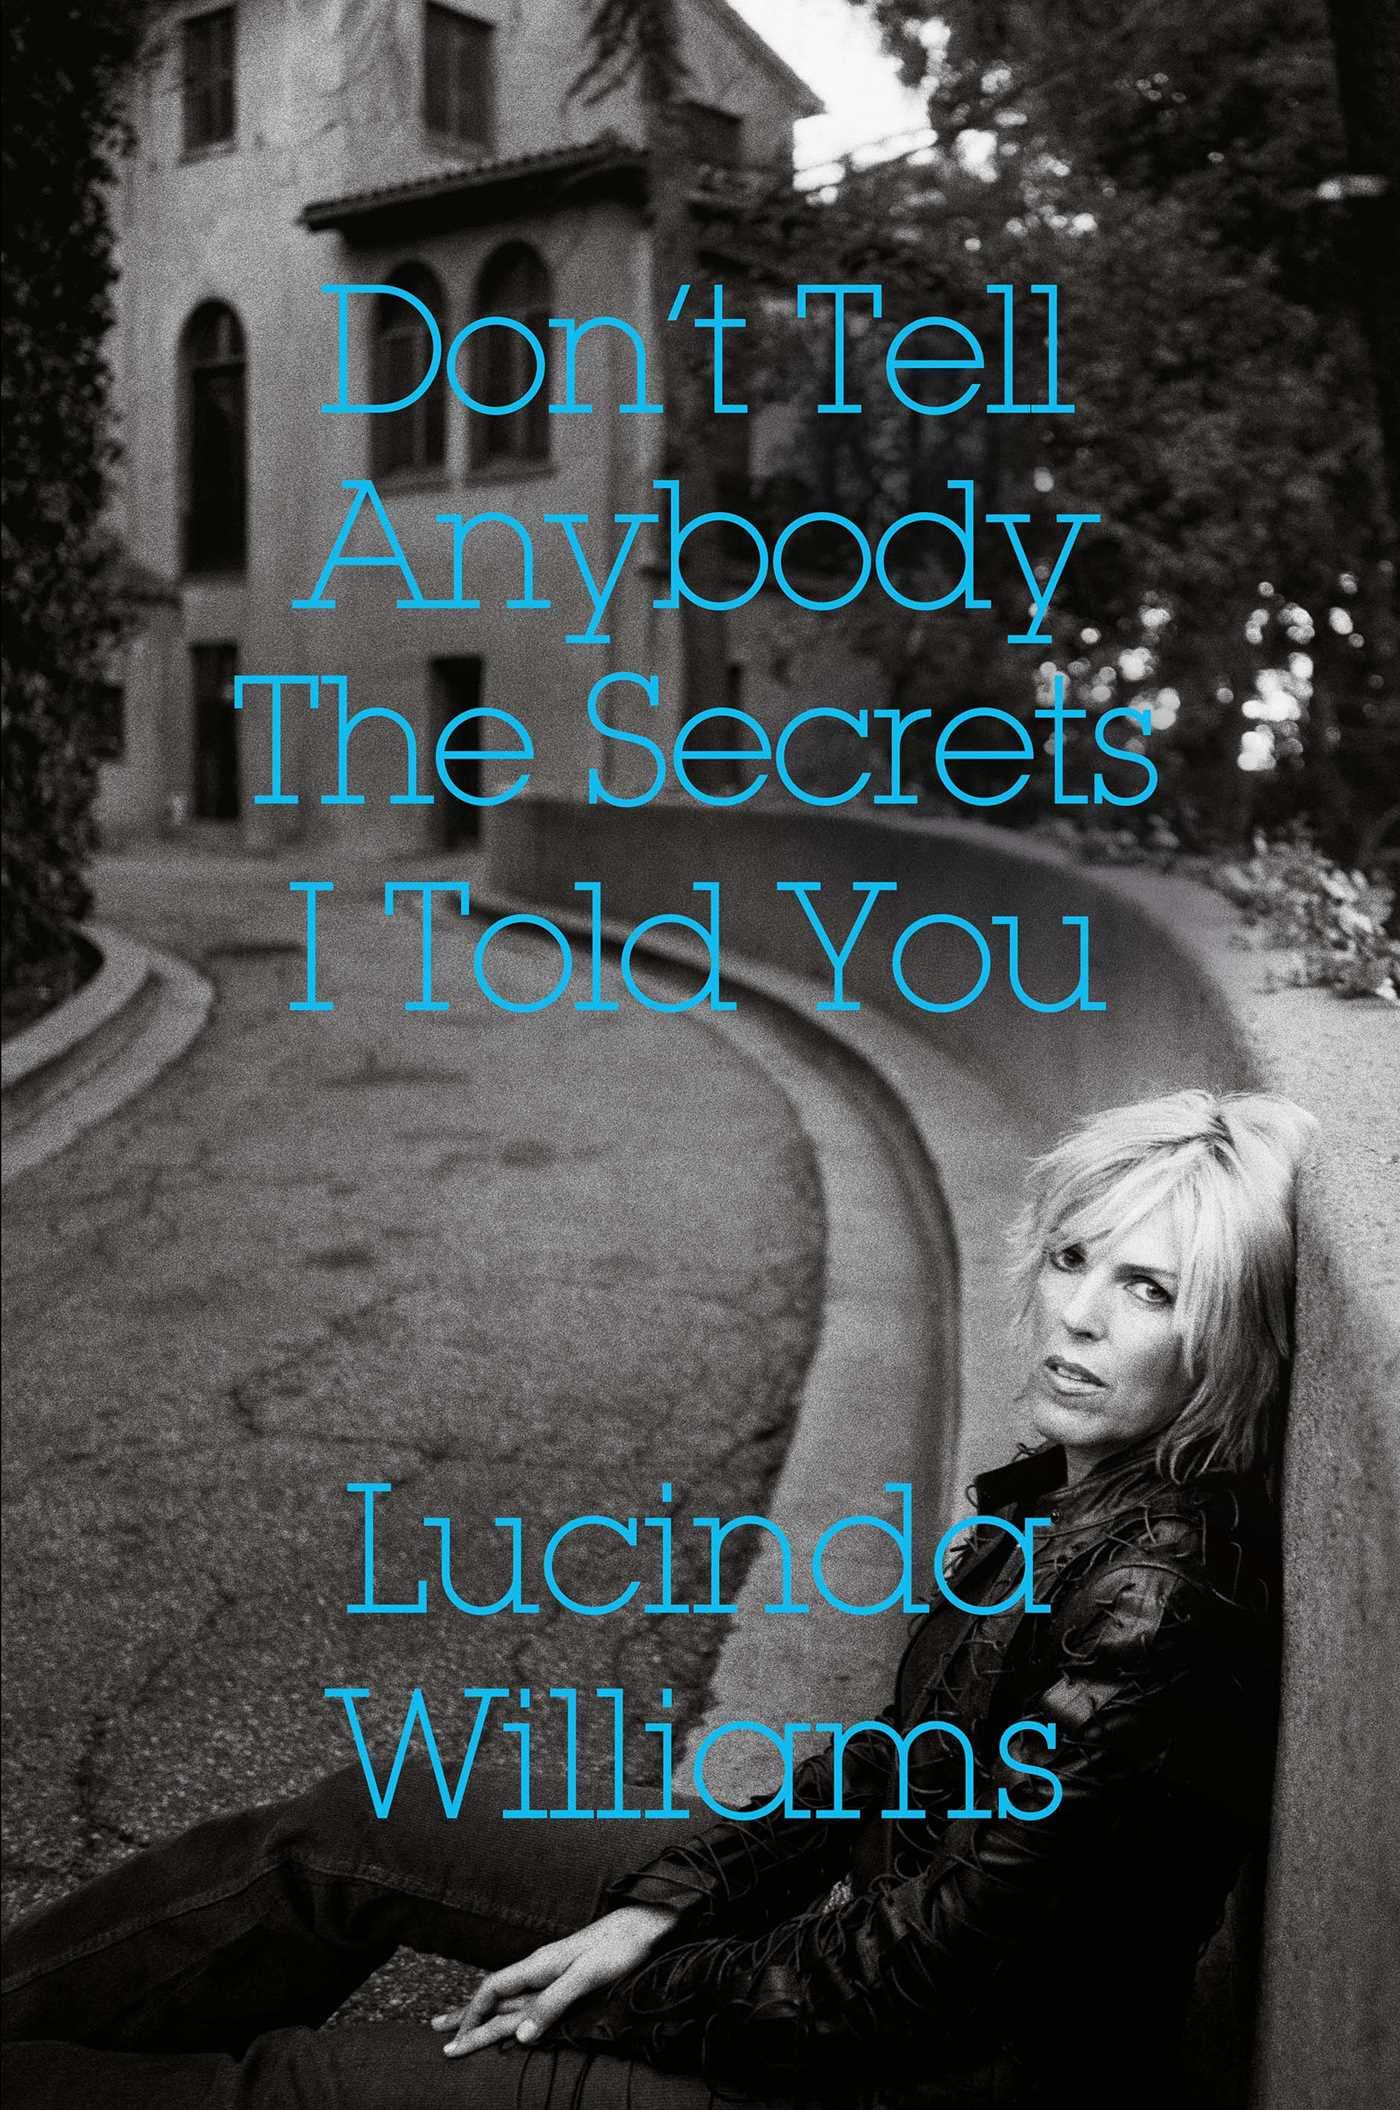 Dont_tell_anybody_the_secrets_I_told_you_Lucinda_Williams book